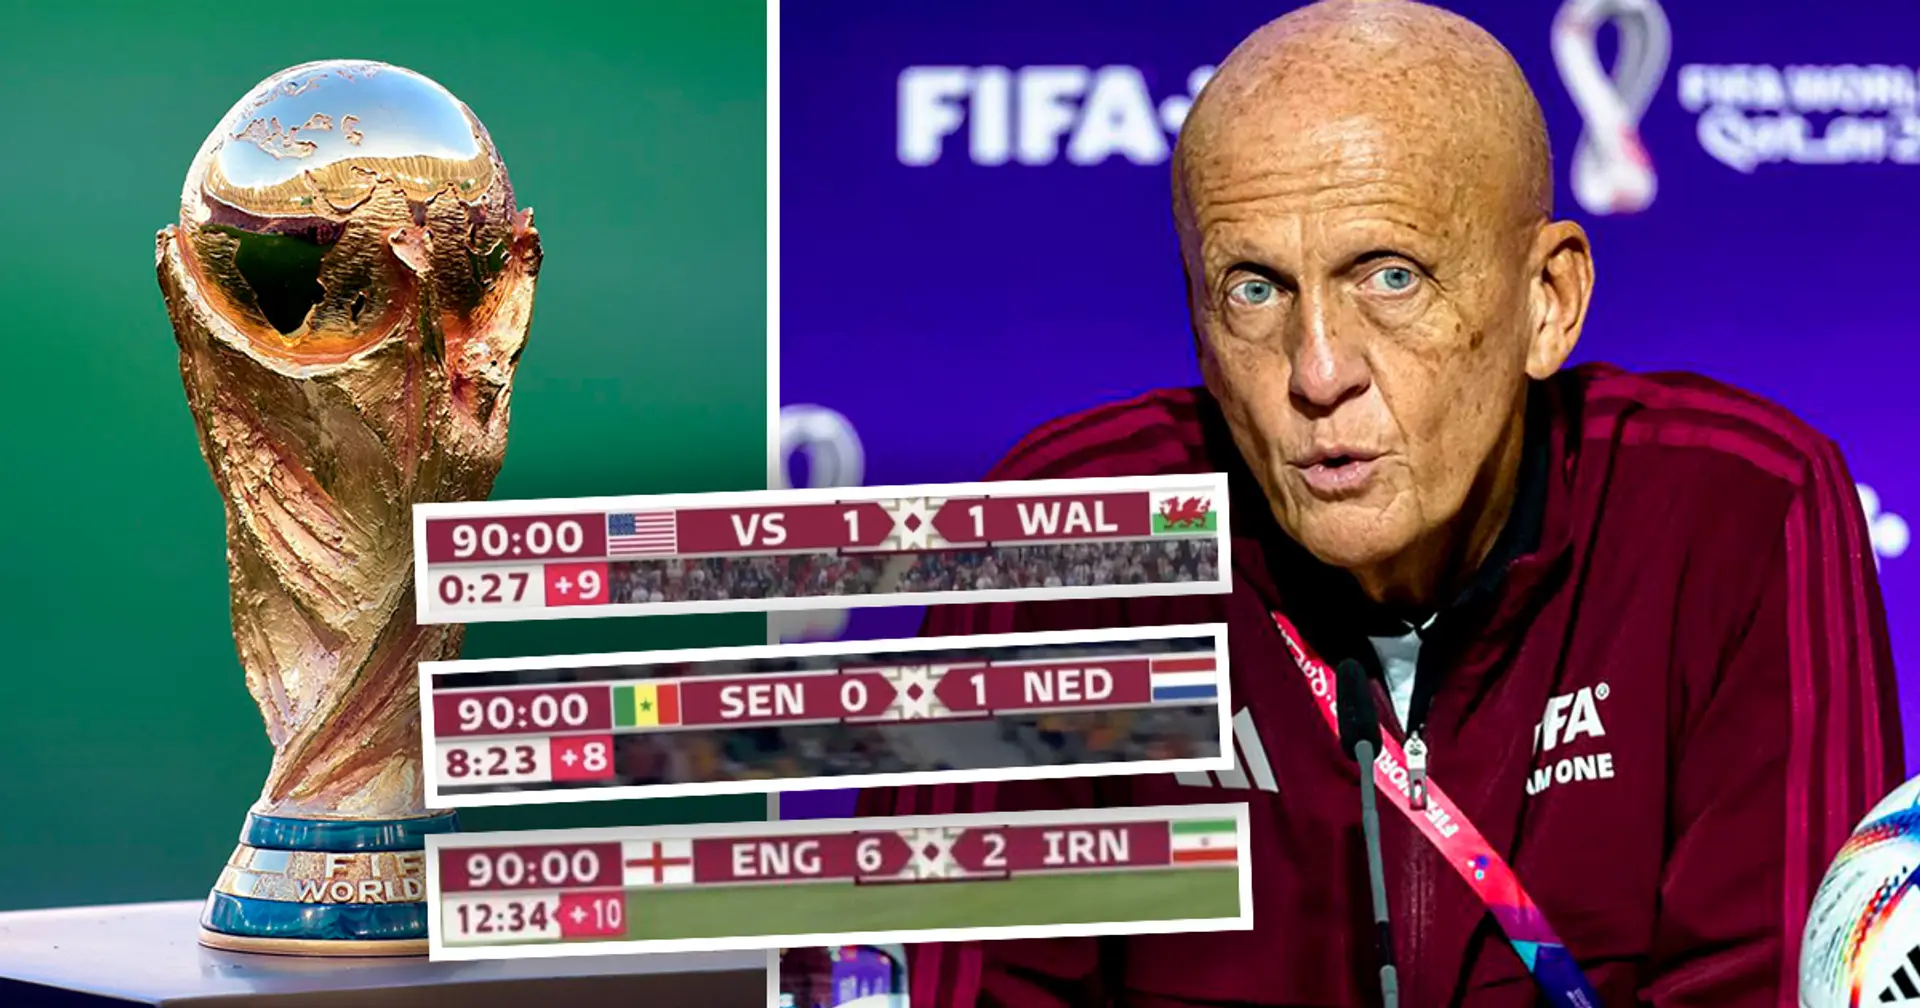 Explained: Why is there so much added time at the World Cup? Legendary referee Pierluigi Collina explains